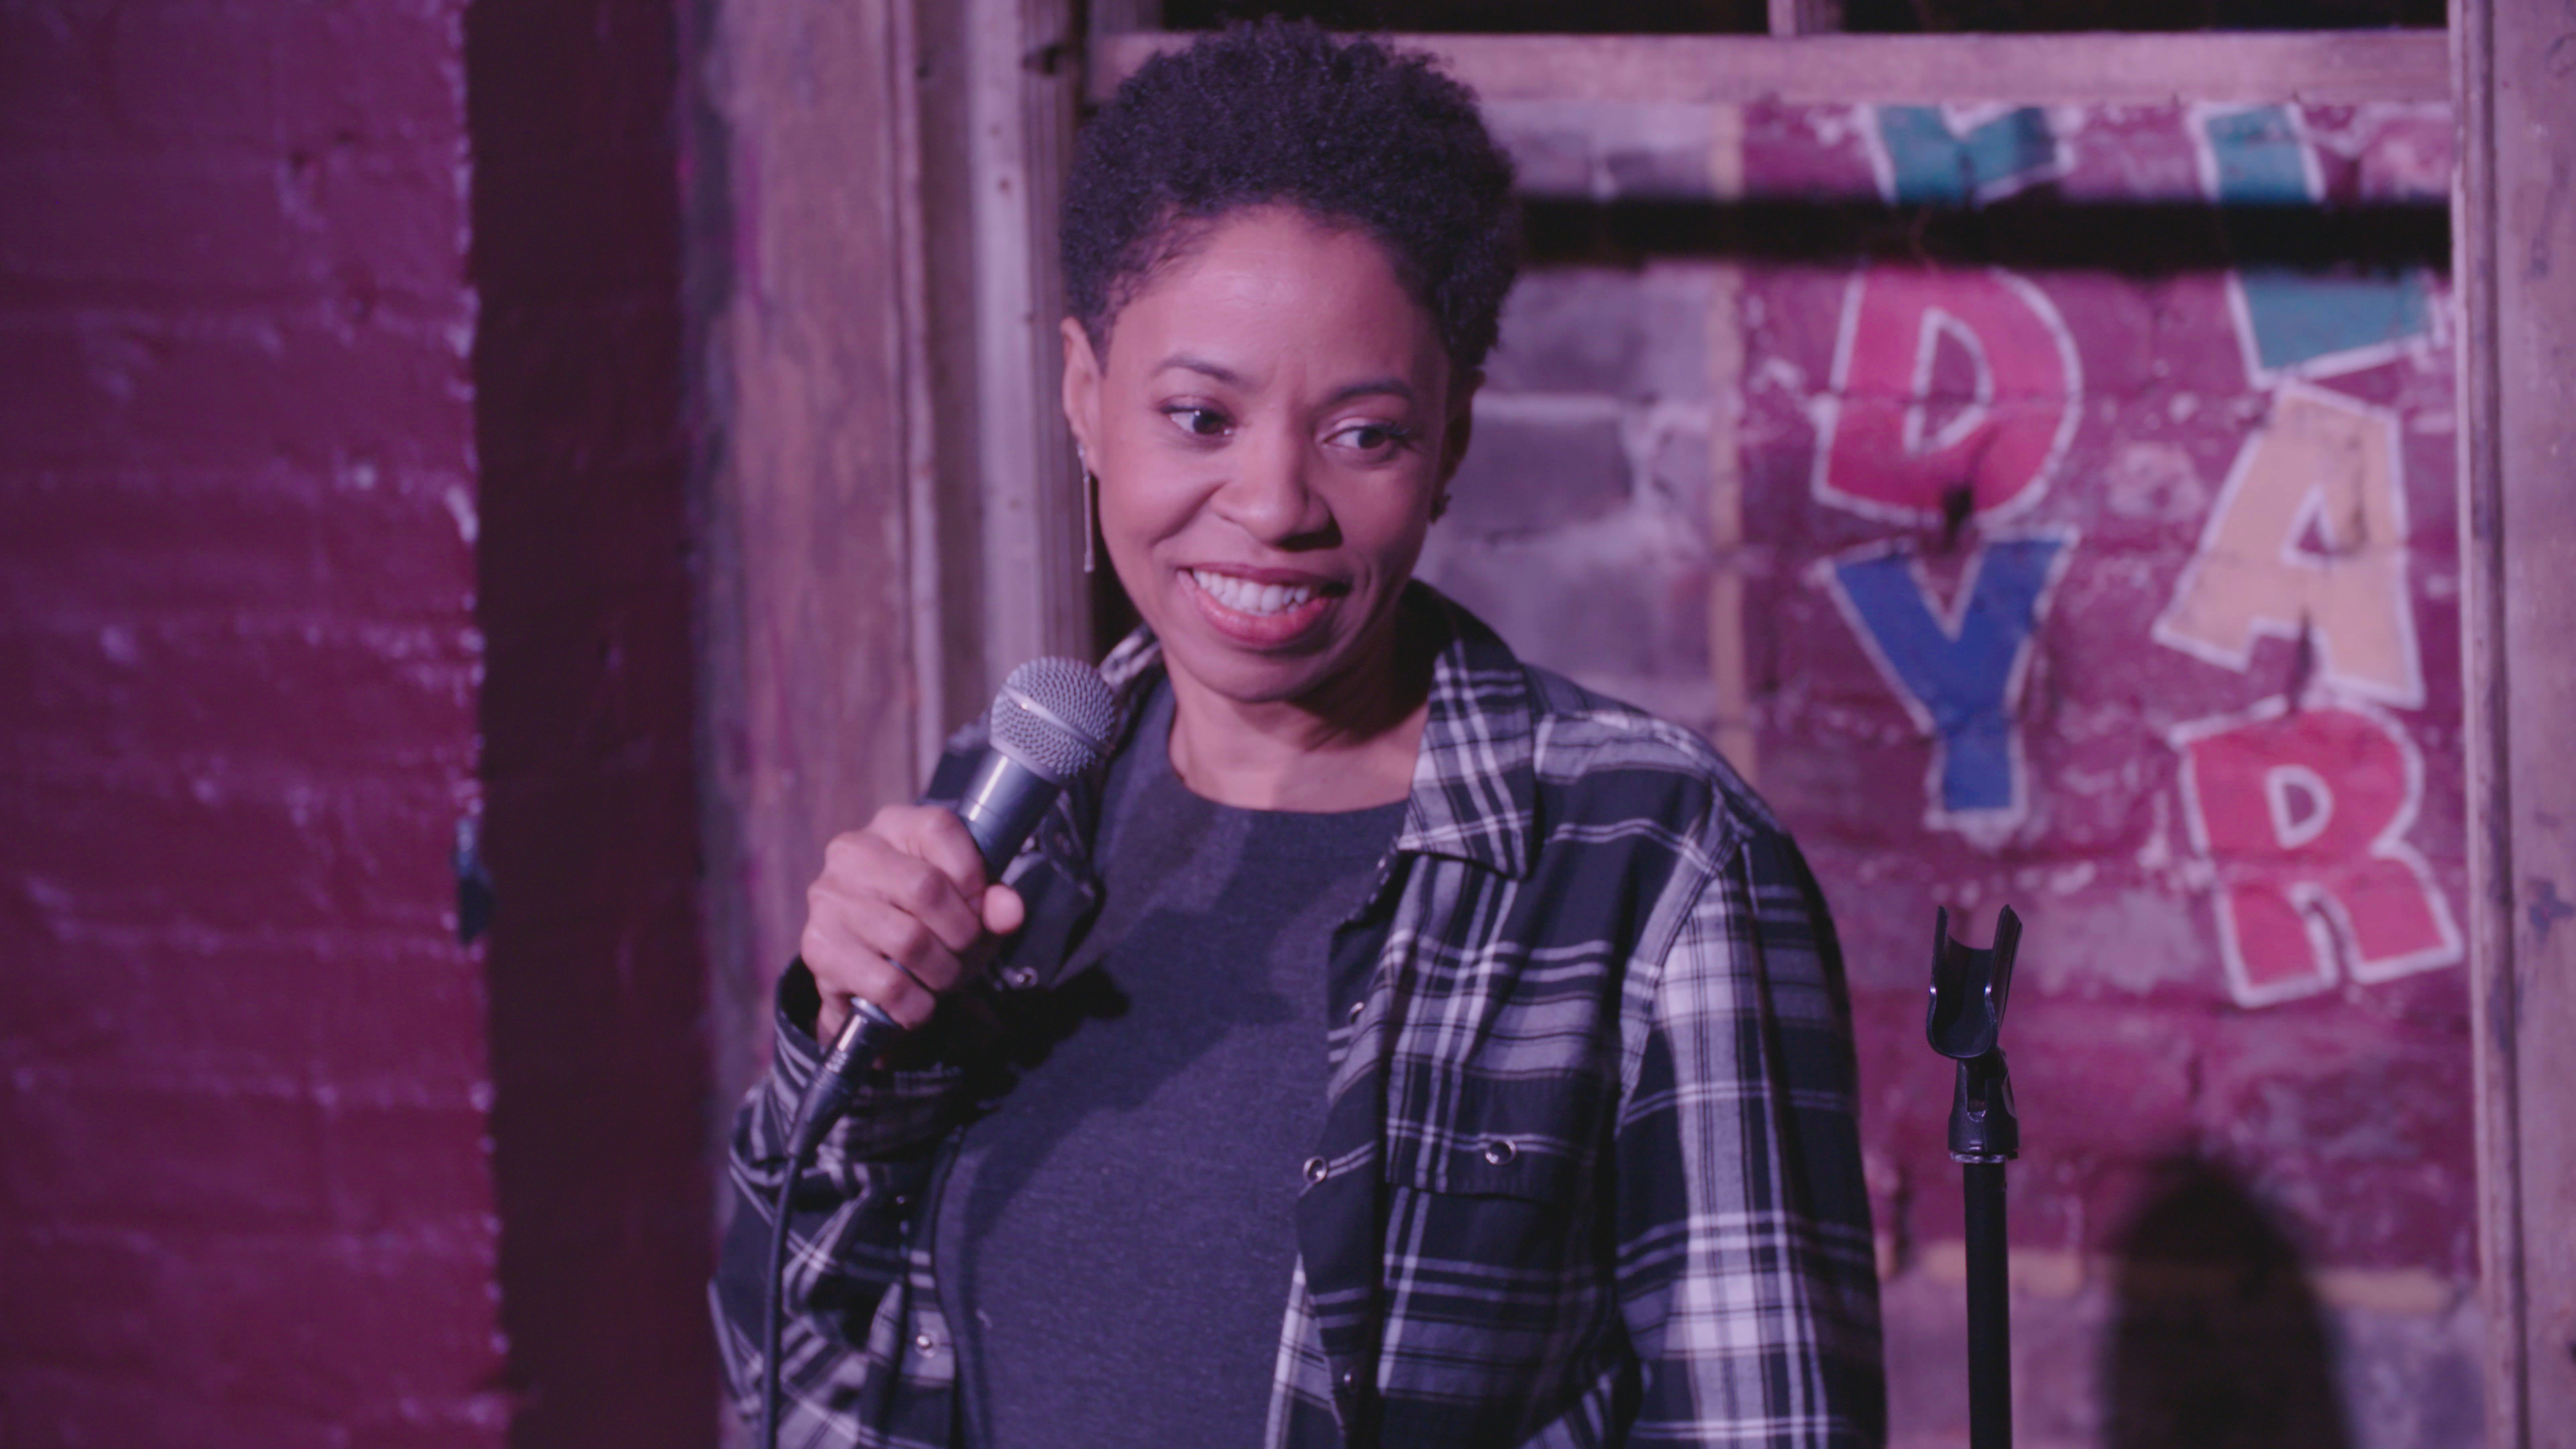 What’s It Like to Be a Woman in Stand-Up Comedy? It’s <i>
<p> </p>
<p>For comedienne Franklin, who shares her breast cancer diagnosis in the documentary and onstage, it provided some catharsis.</p>
<p>“It’s a healing journey. For me, that was the first time I ever had to talk about the fact that I could possibly die,” Franklin told reporters on a conference call.</p>
<p>“I was killing [onstage],” she continued. “But it was moments like that that you realize that you were always meant to be a comedian, too, because when you have real intense moments like that, and you can make people laugh with it. And it makes you feel good, and it makes them feel good.”</p>
<p><span style=